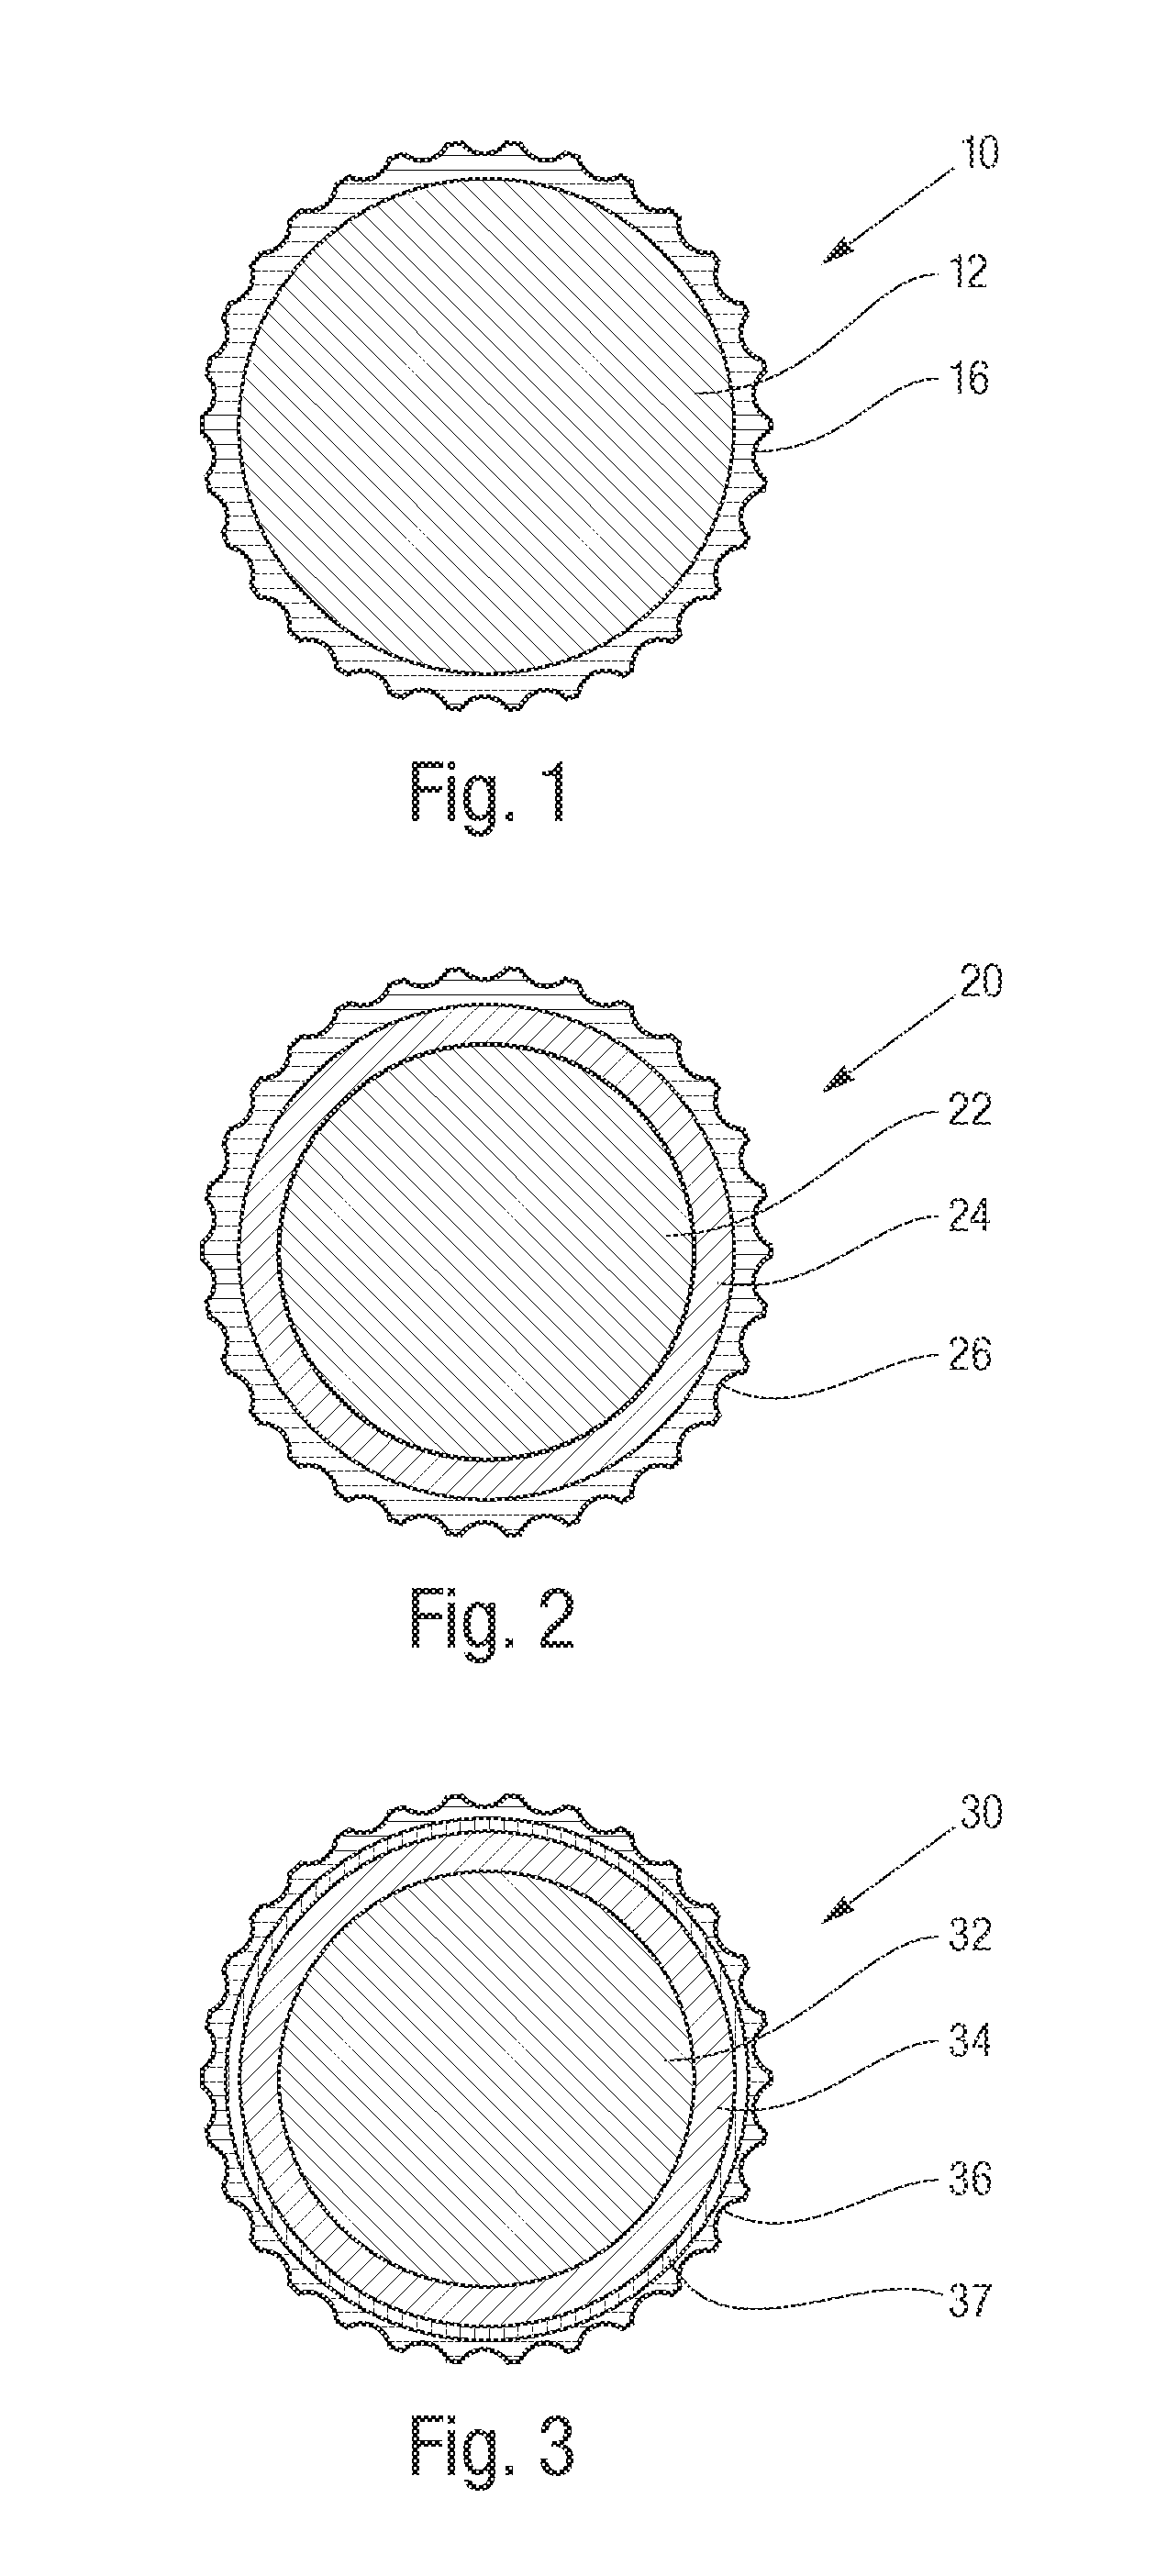 Use of curable compositions containing dithiane monomers for golf ball cores